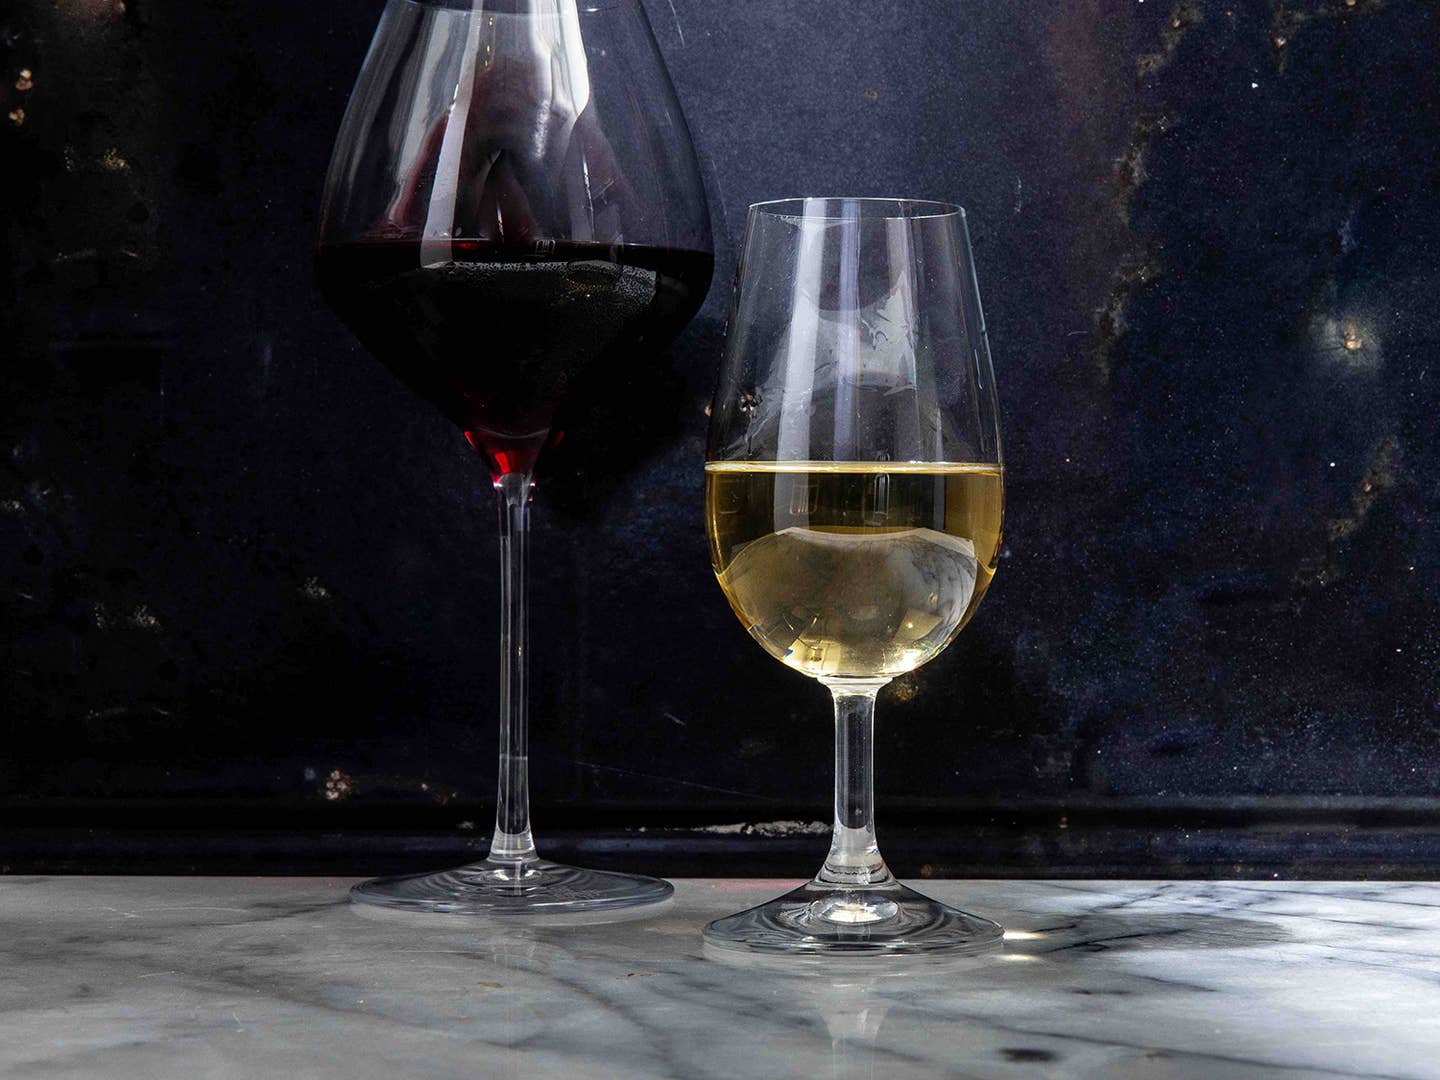 Tiny Wine Glasses Have Won Us Over. Here's Why